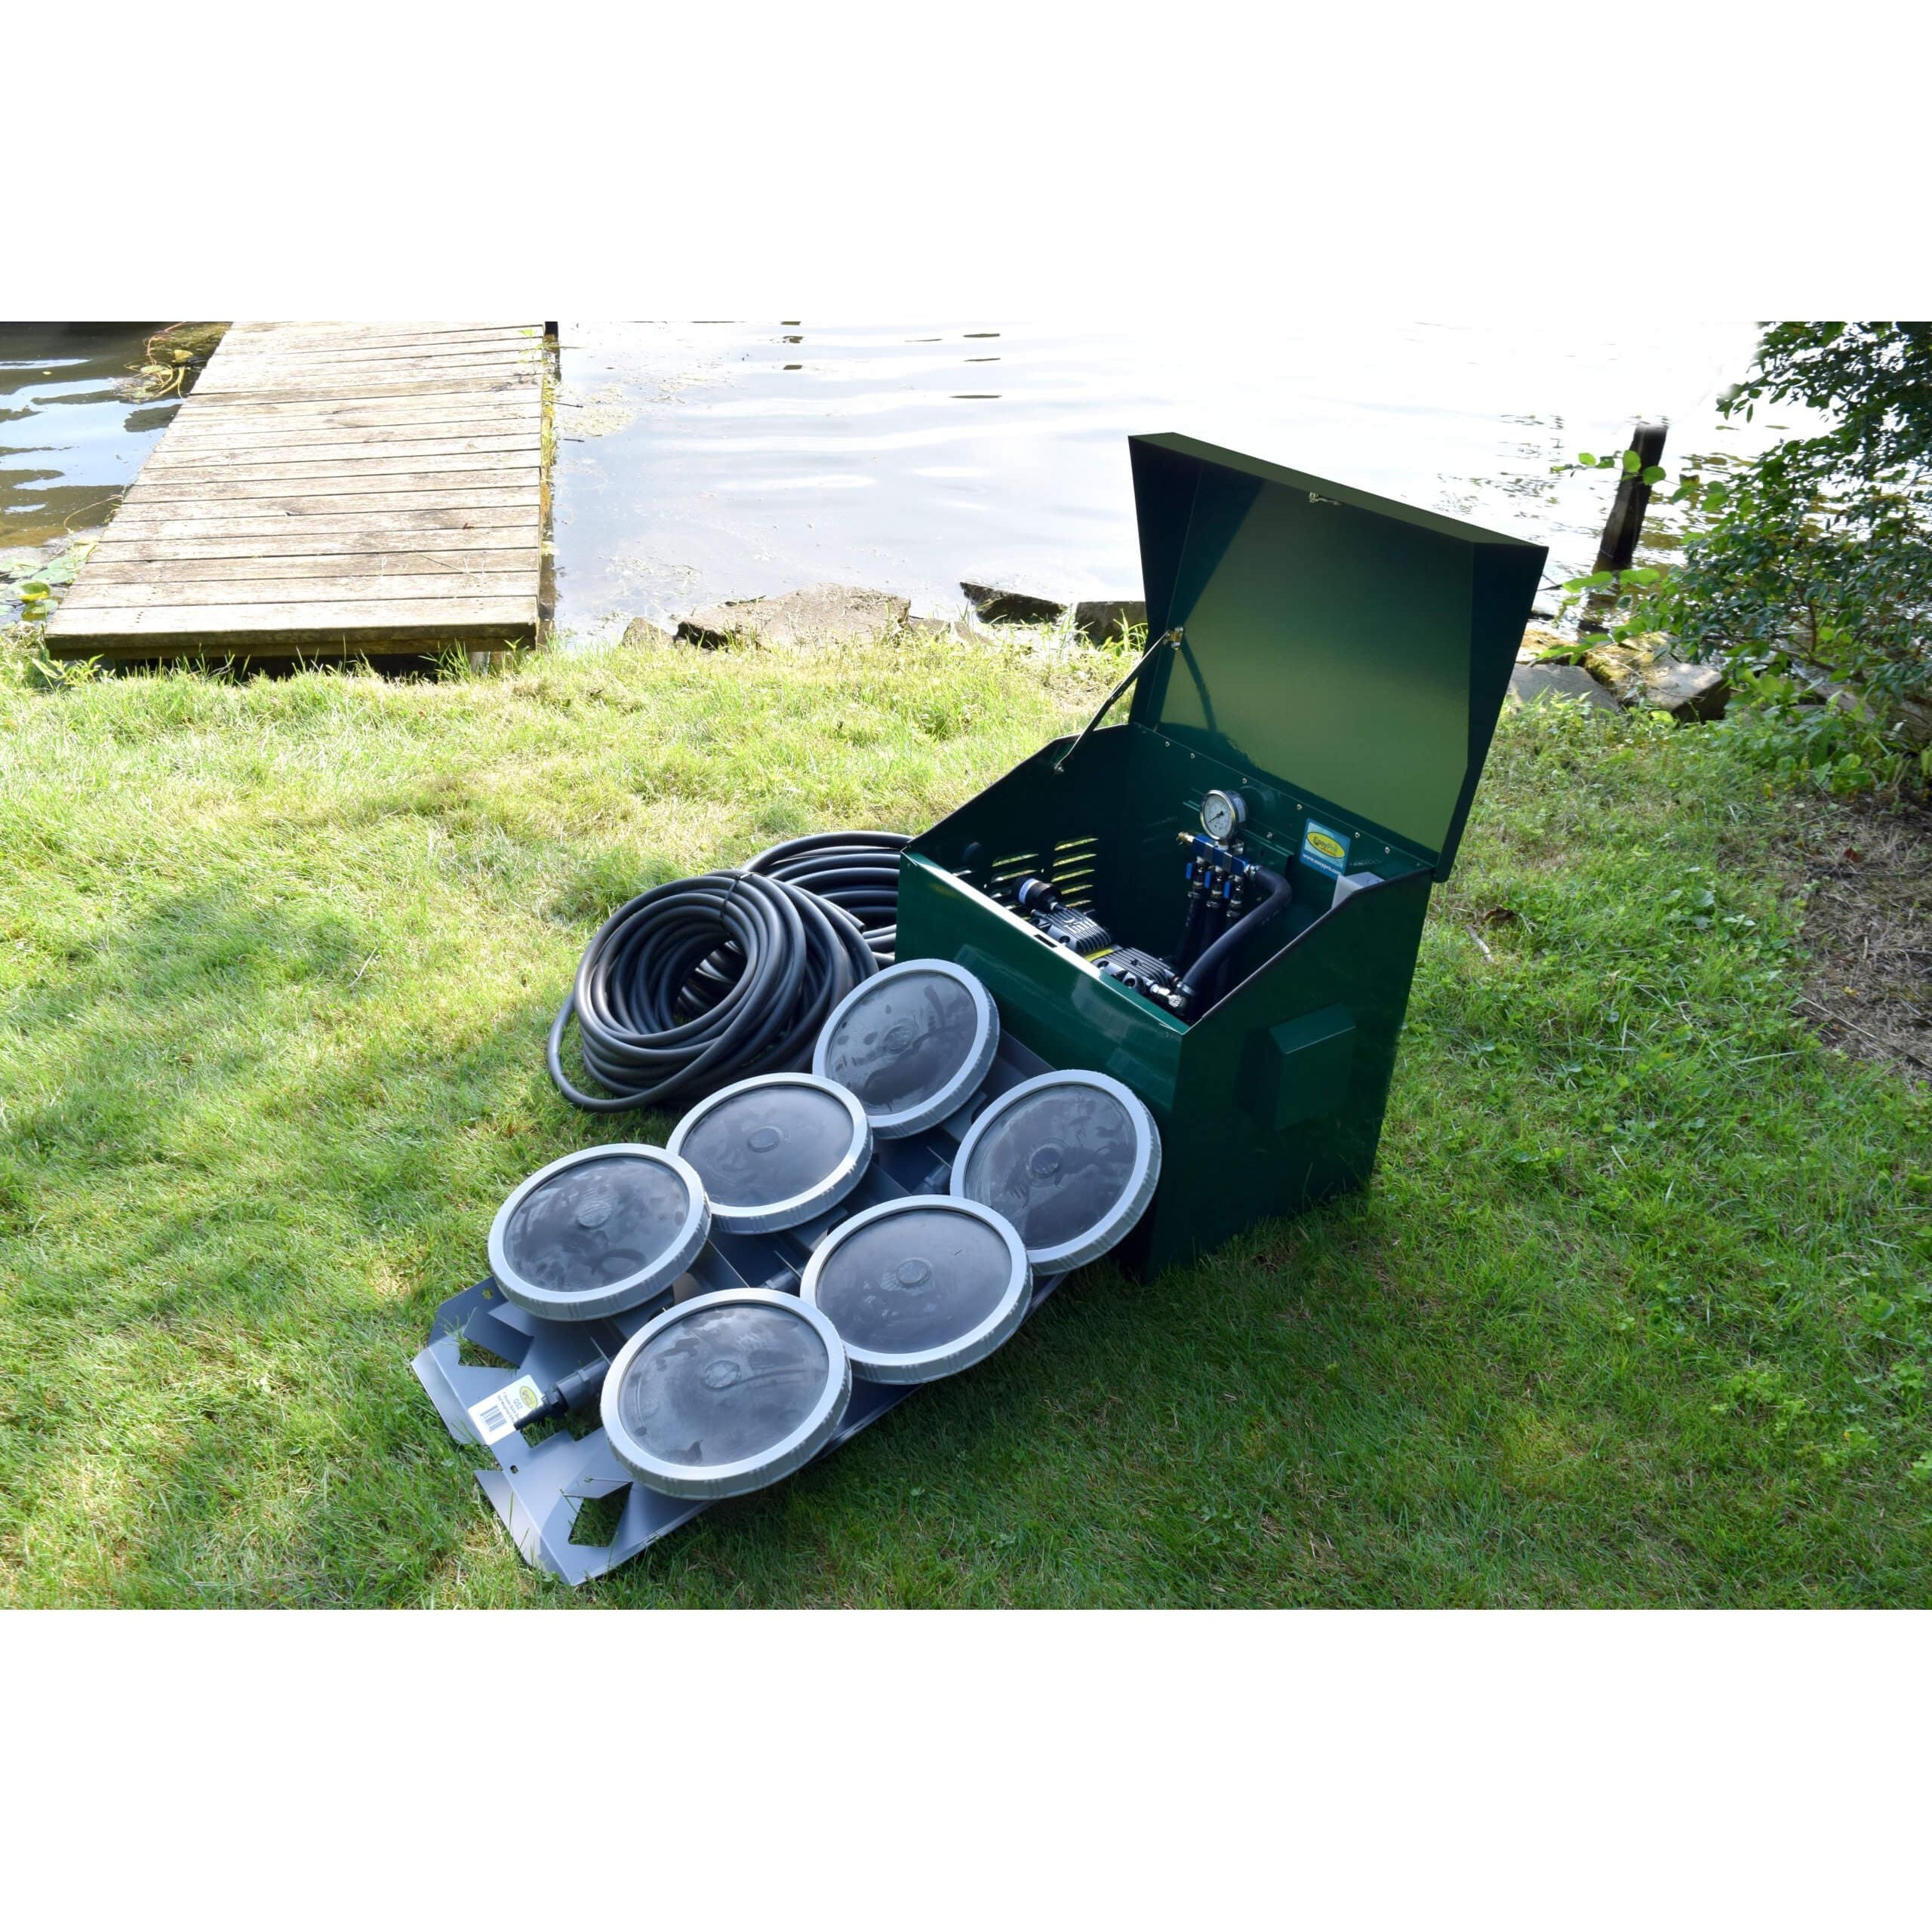 EasyPro PA66D Sentinel Deluxe Aeration System – Complete PA66 system with cabinet - American Pond Supplies Easy Pro Aerator Aerator